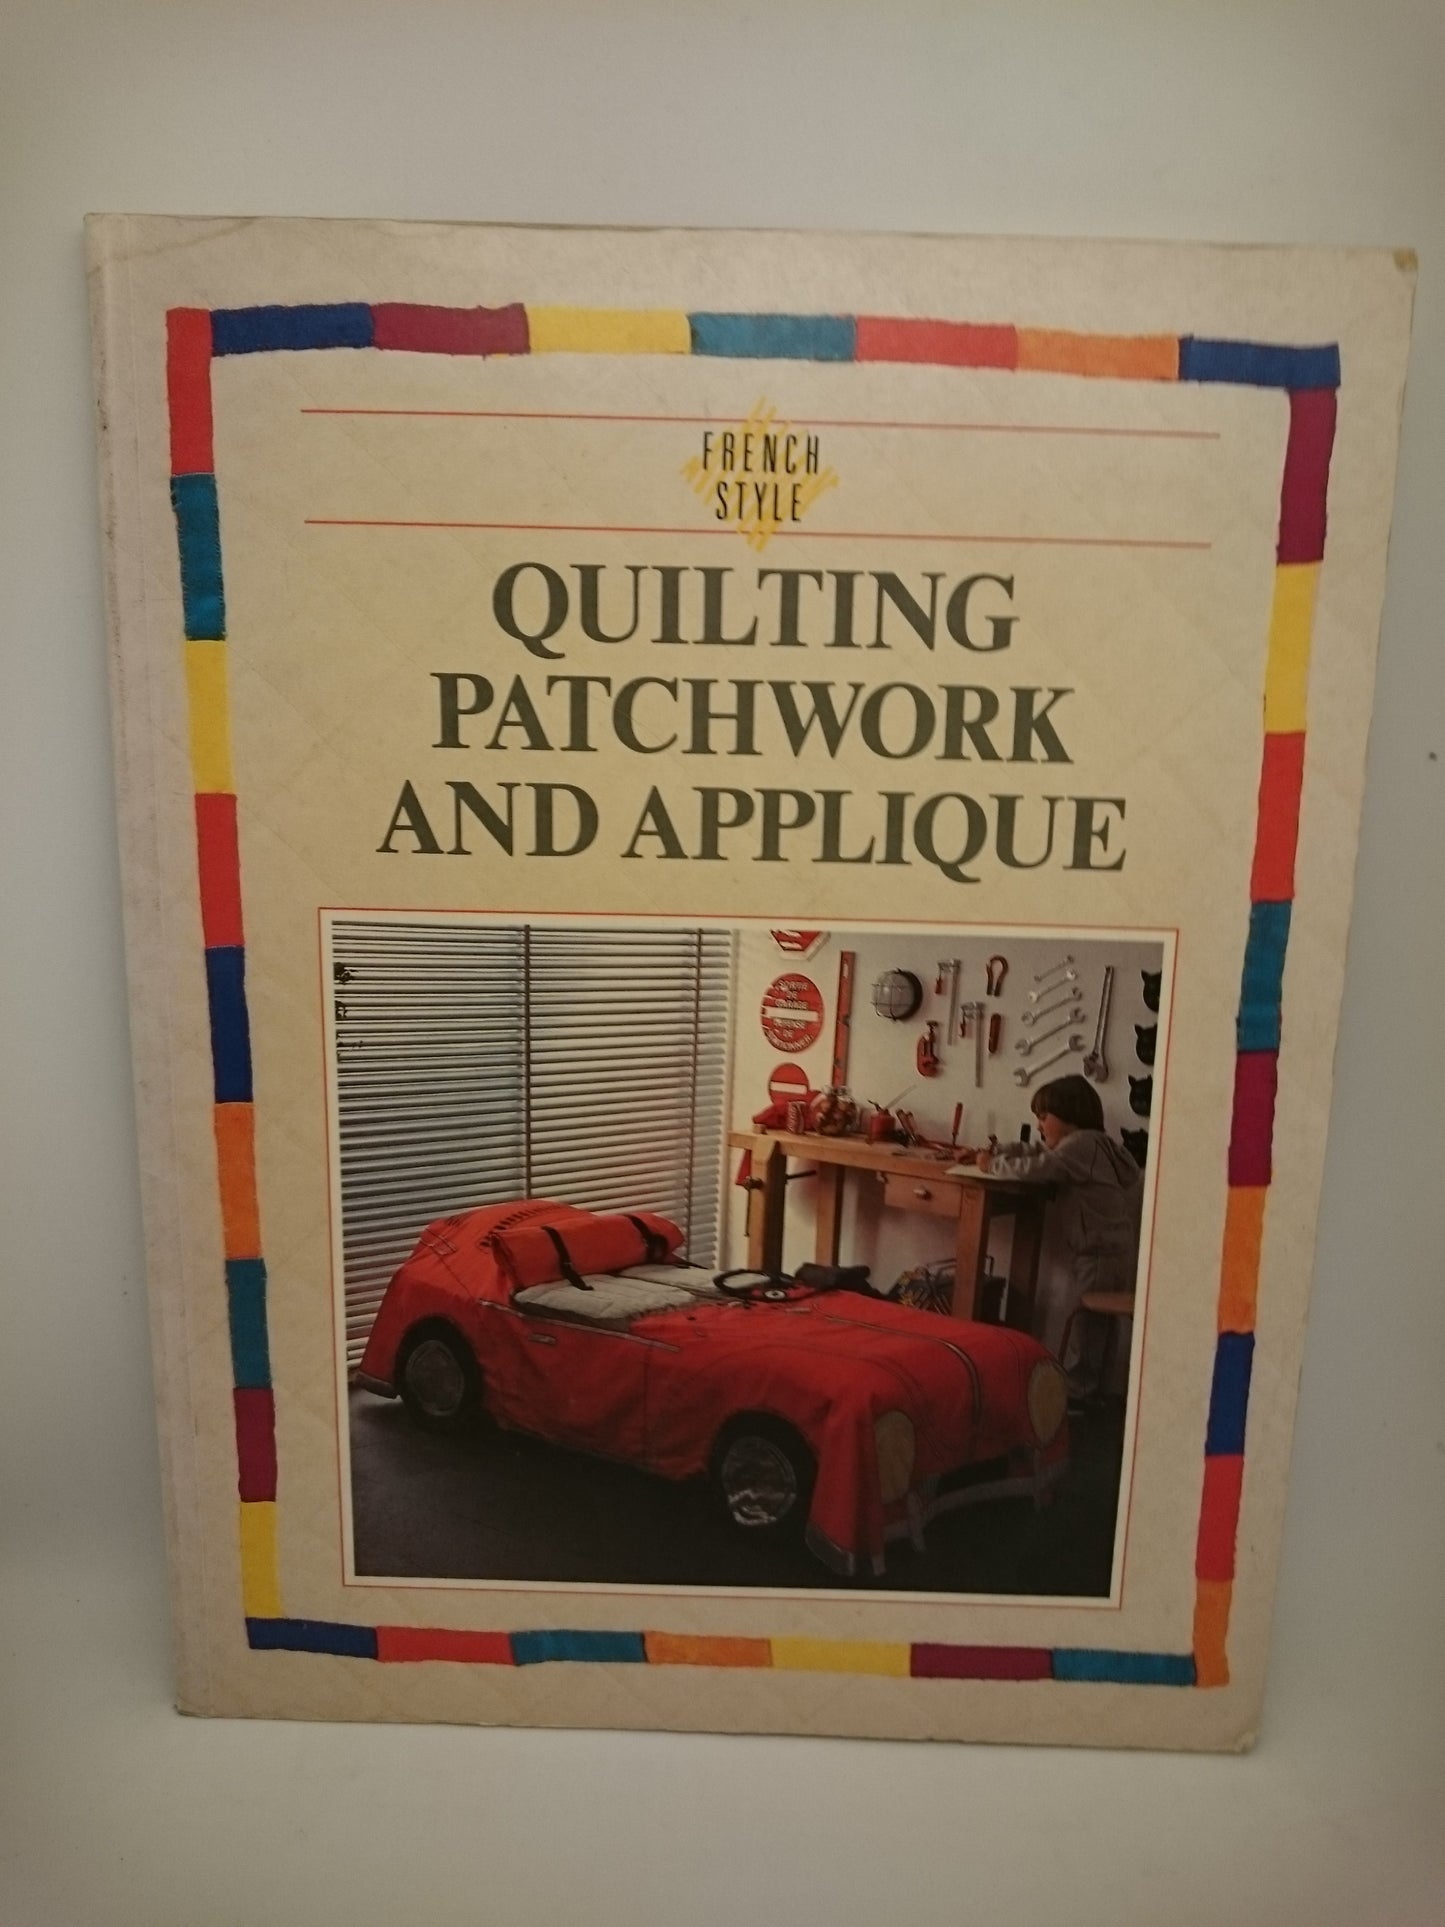 Quilting Patchwork and Applique